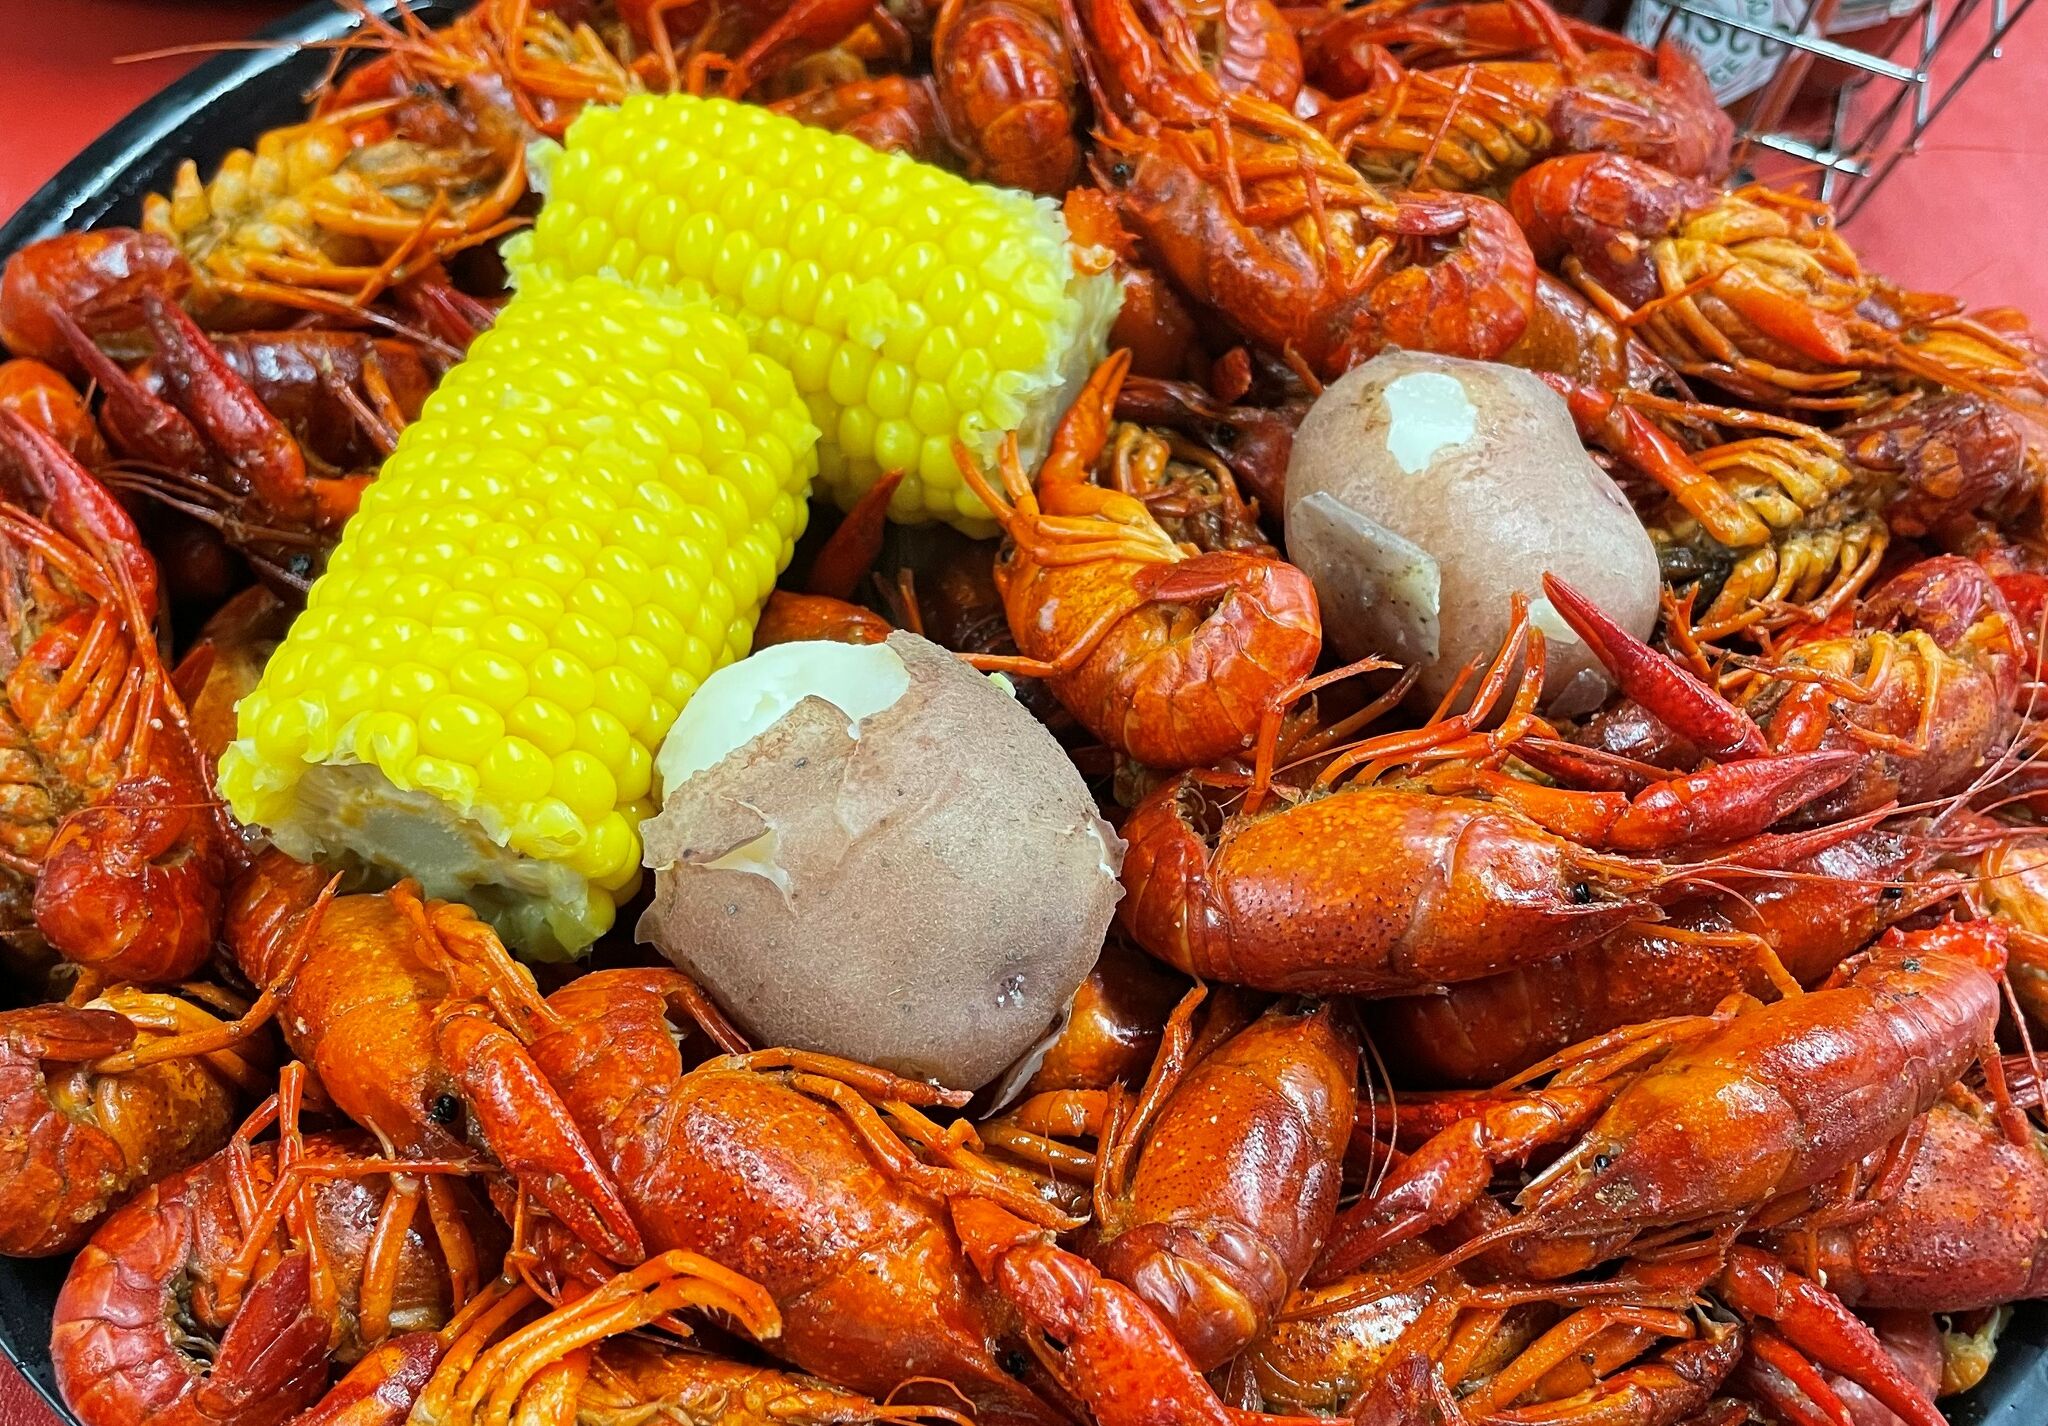 Astros Crawfish Boil: July 20th, 2022 - The Crawfish Boxes